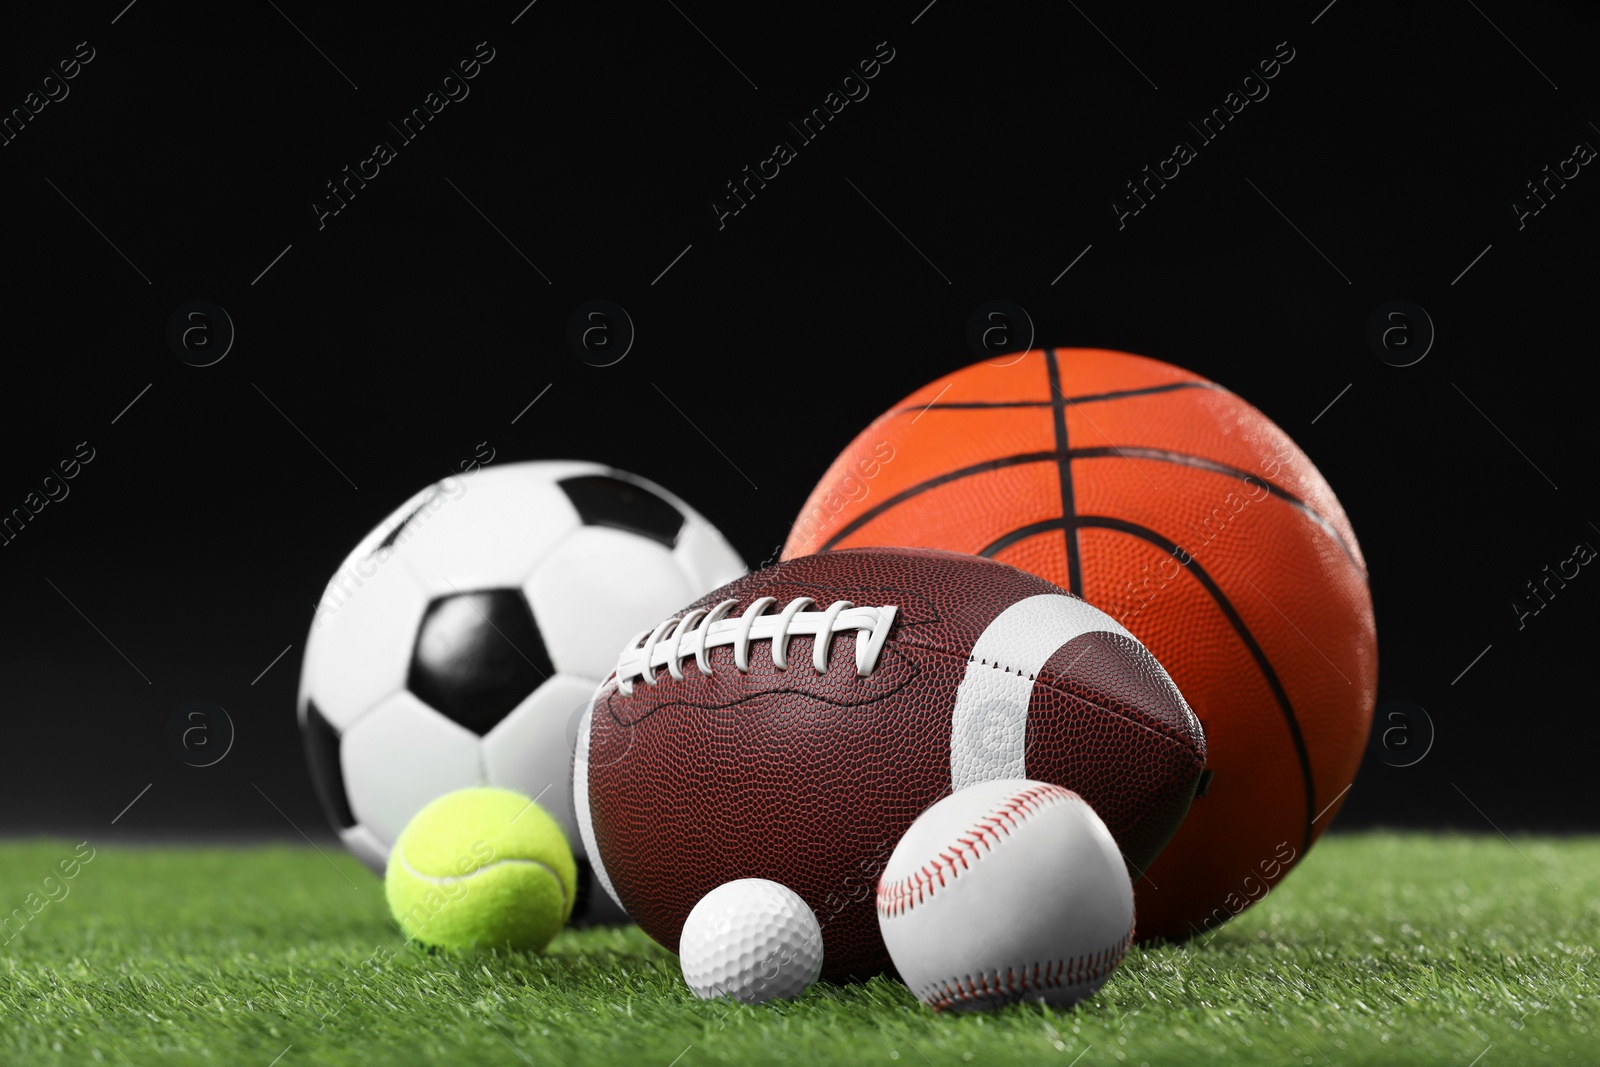 Photo of Many different sports balls on green grass against black background